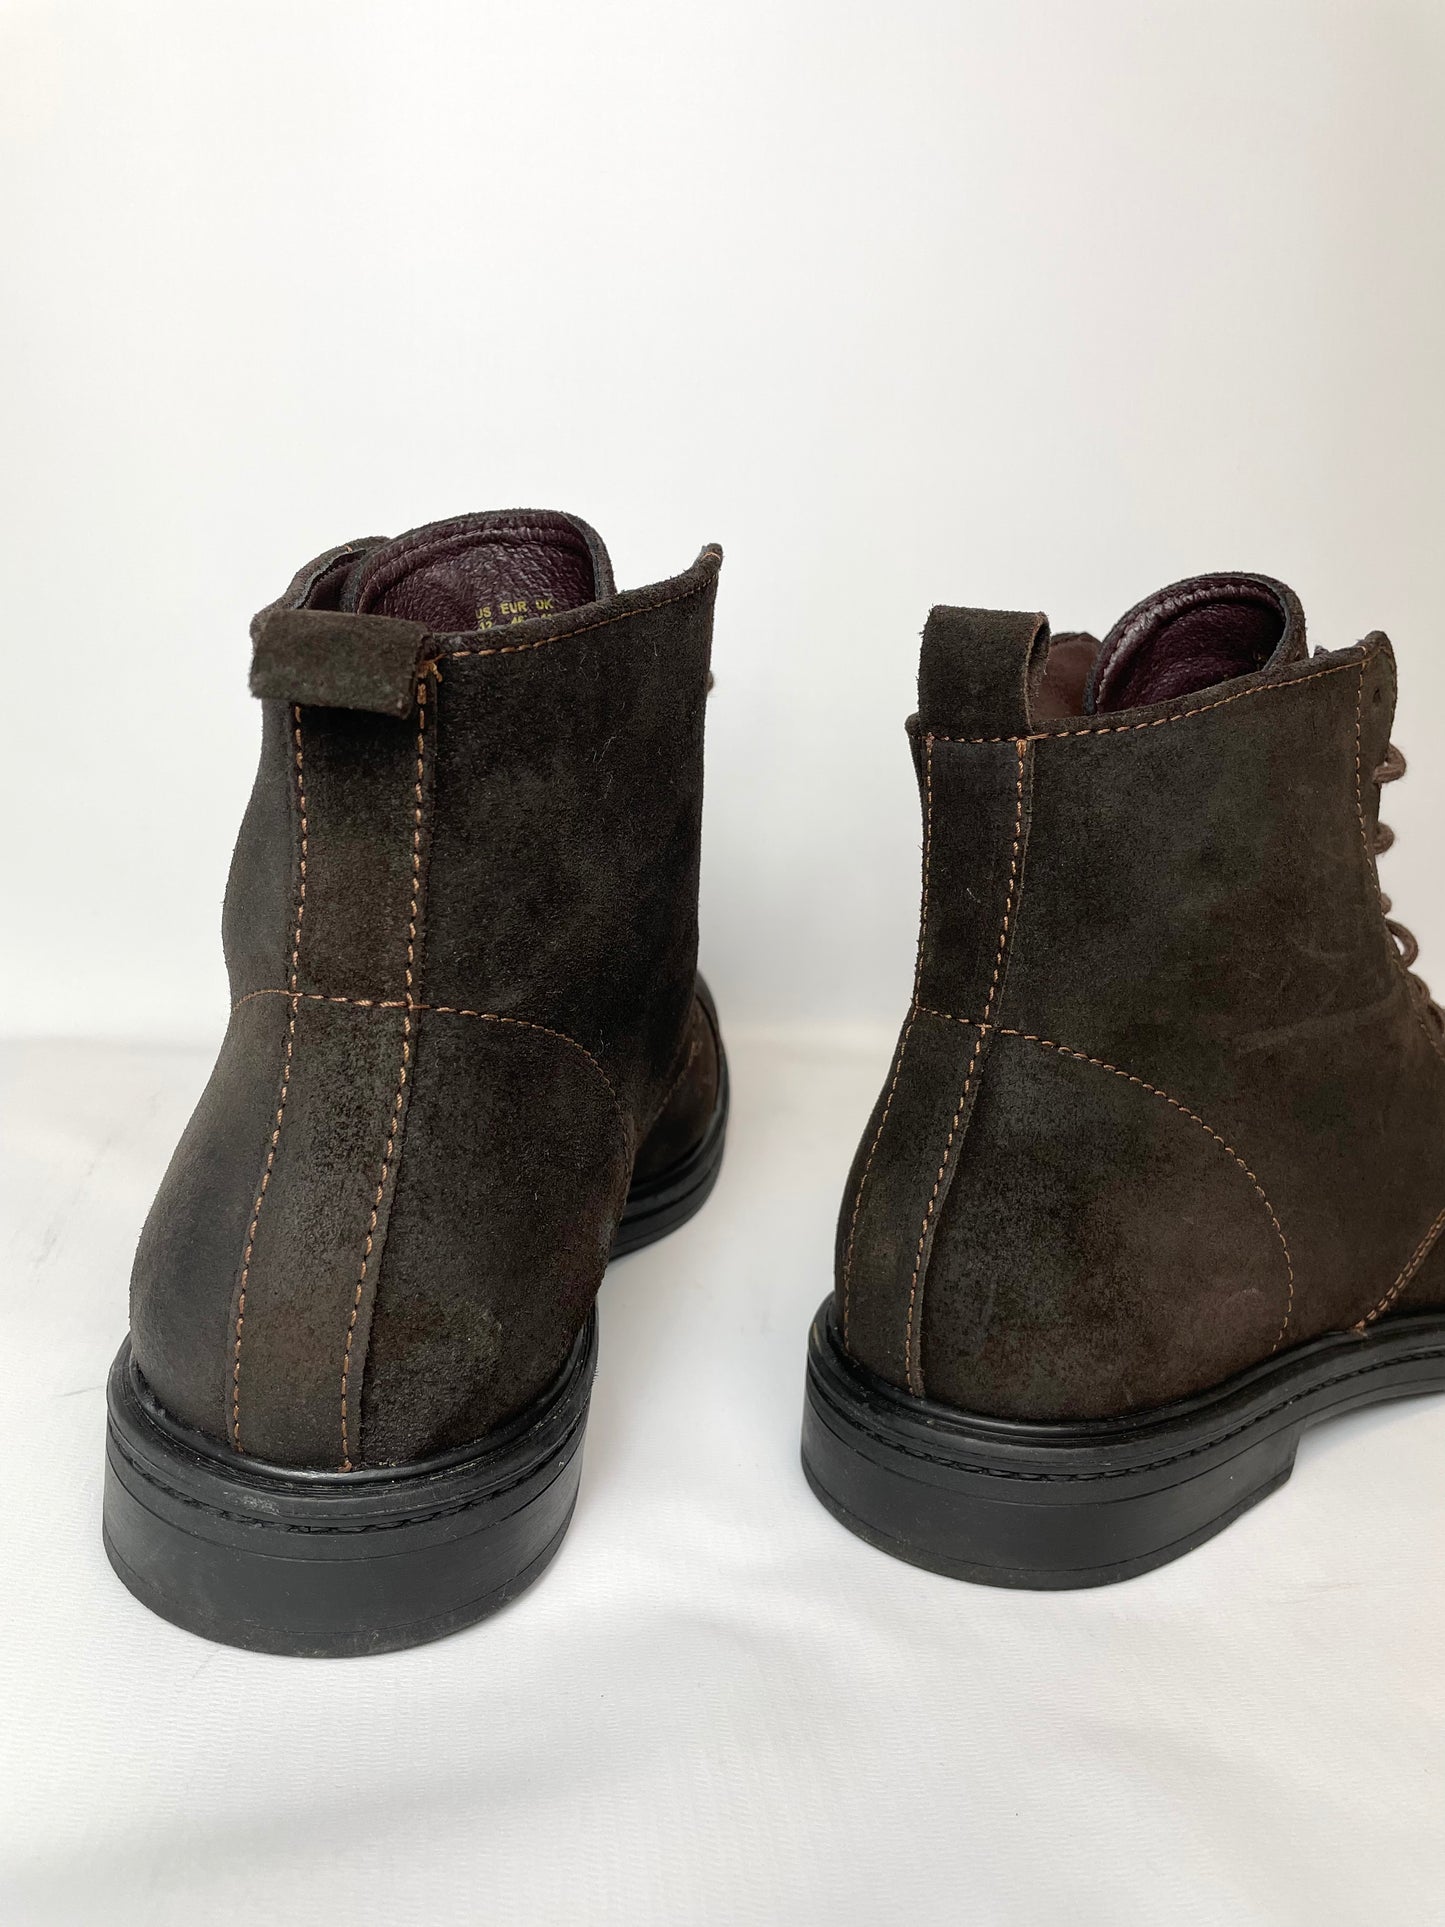 Mens Suede Leather Lace-up Ankle Boots Brown